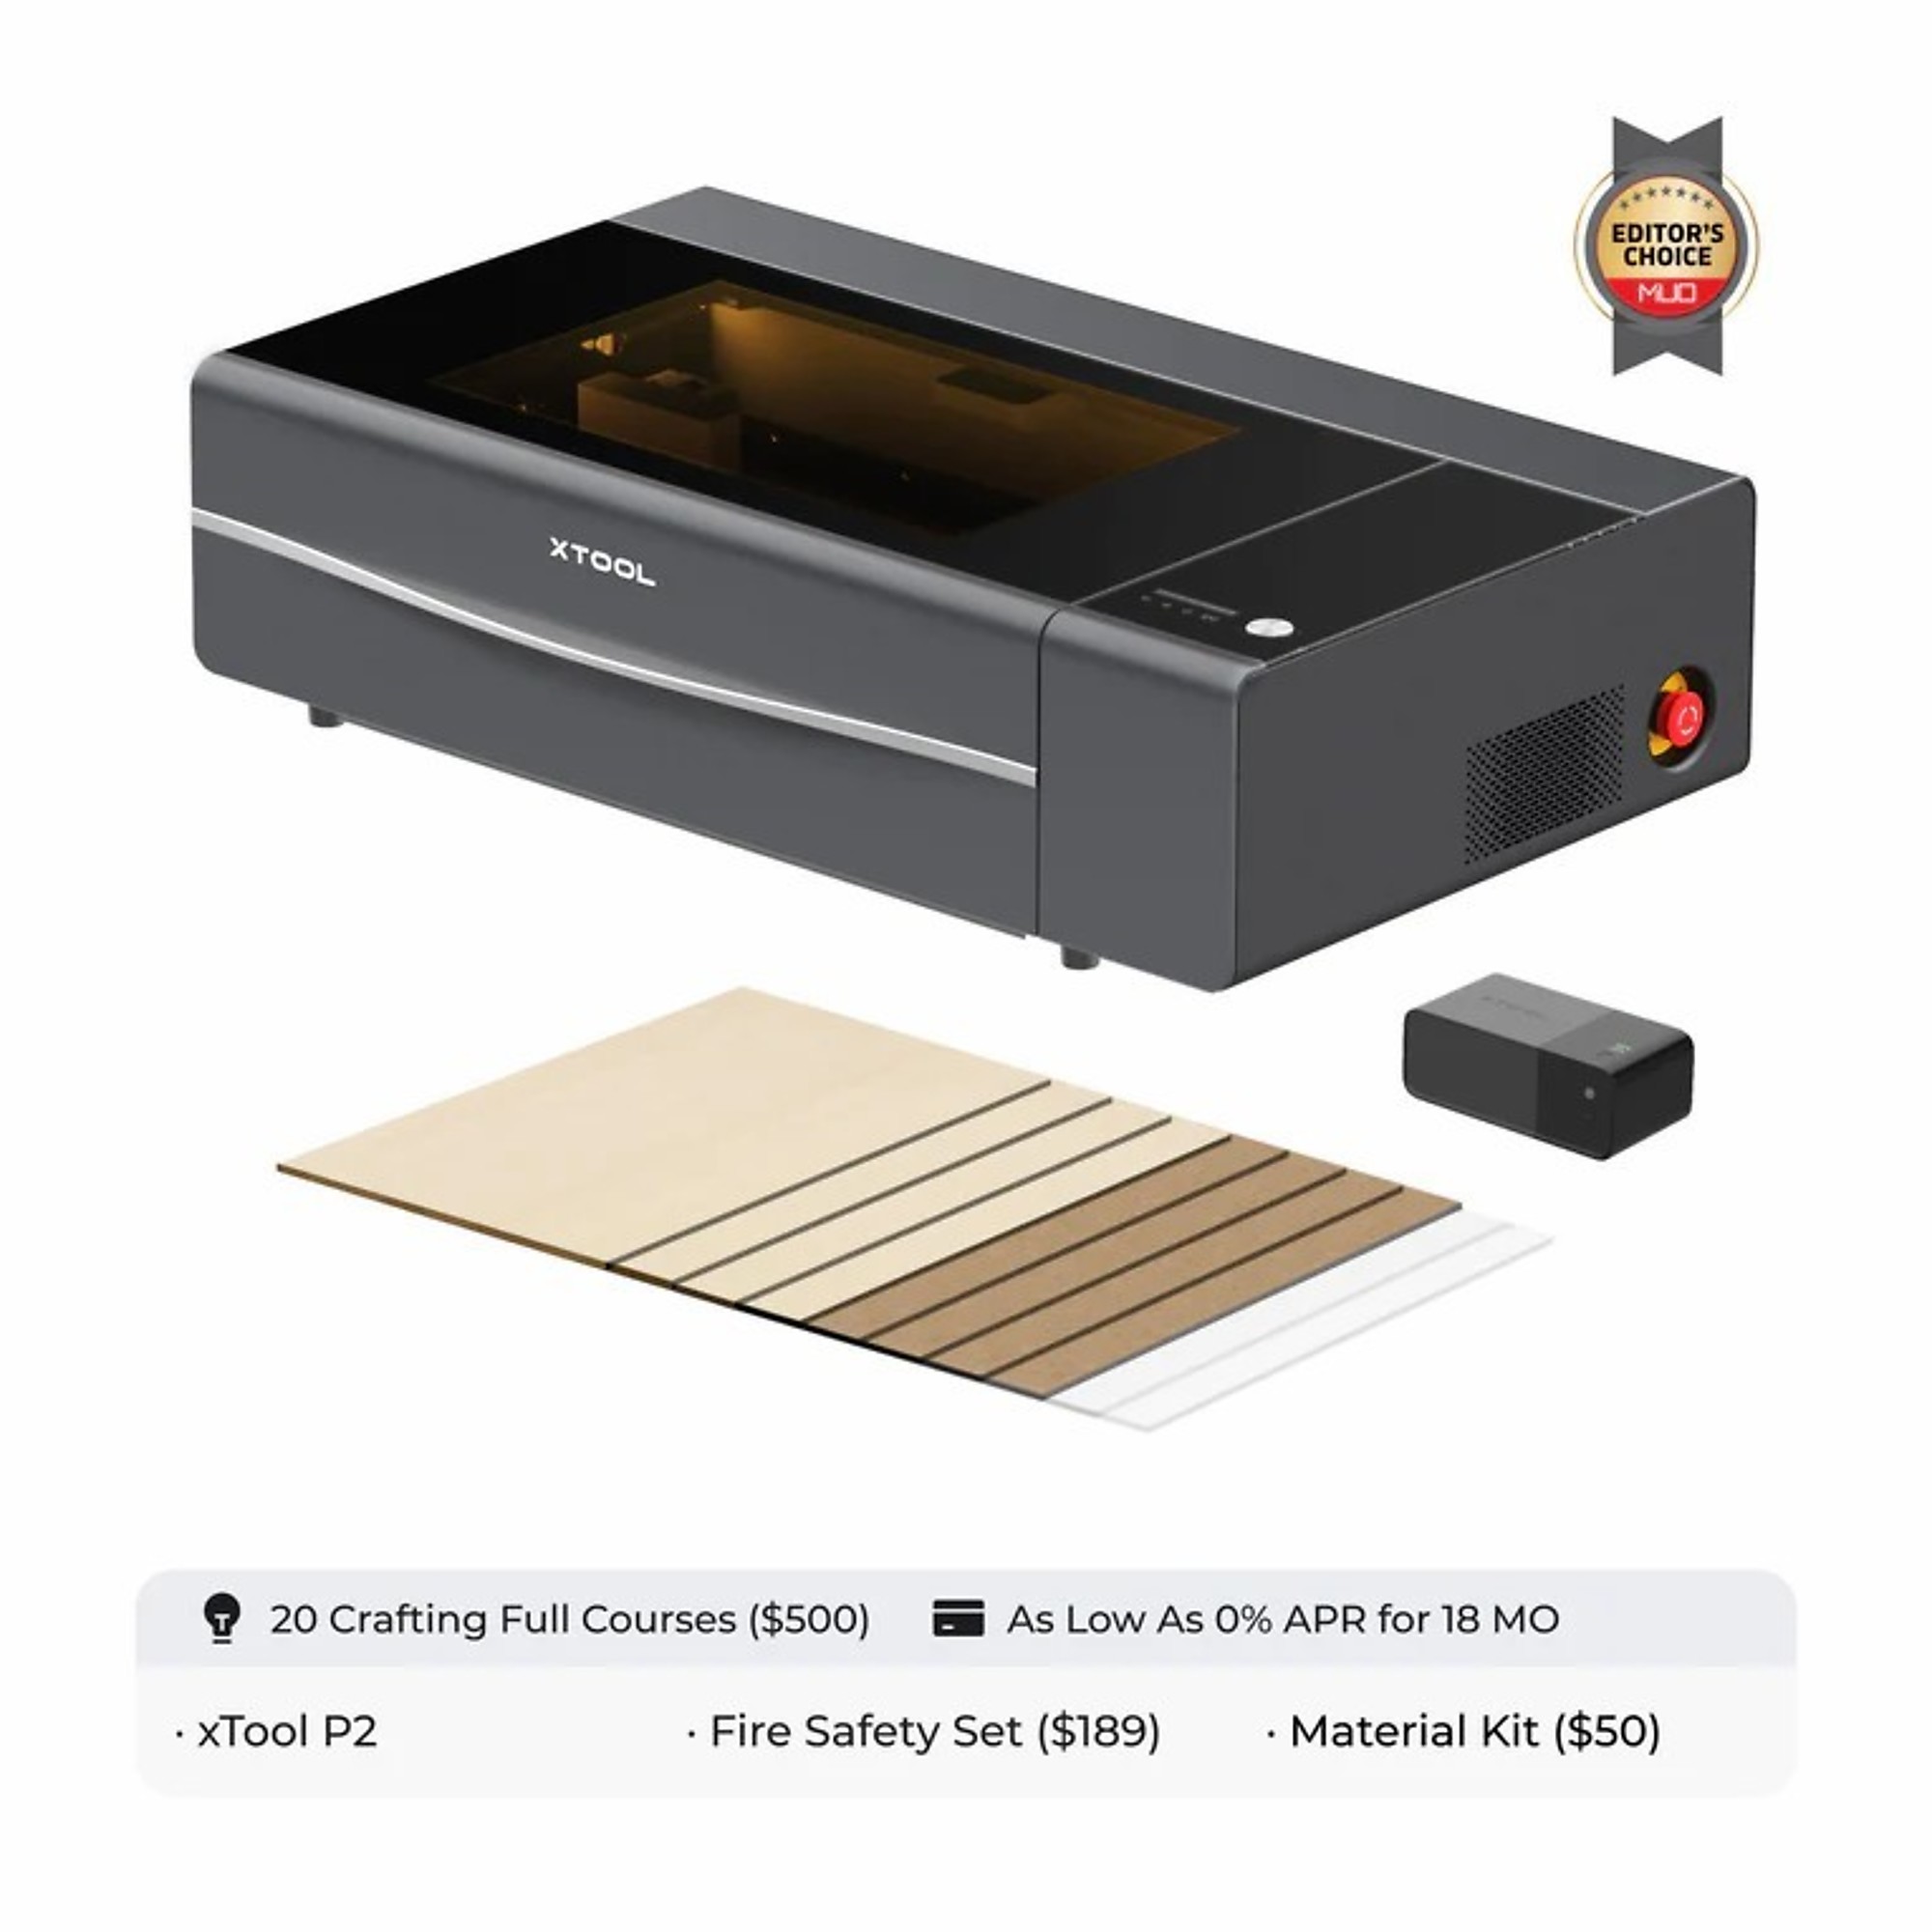 xTool, Laser Cutter and Engraver, 55w, 600mm/s, Model, Working Width 29.13 in, Working Length 44.09 in, Laser Power 55 W, Model P1030386